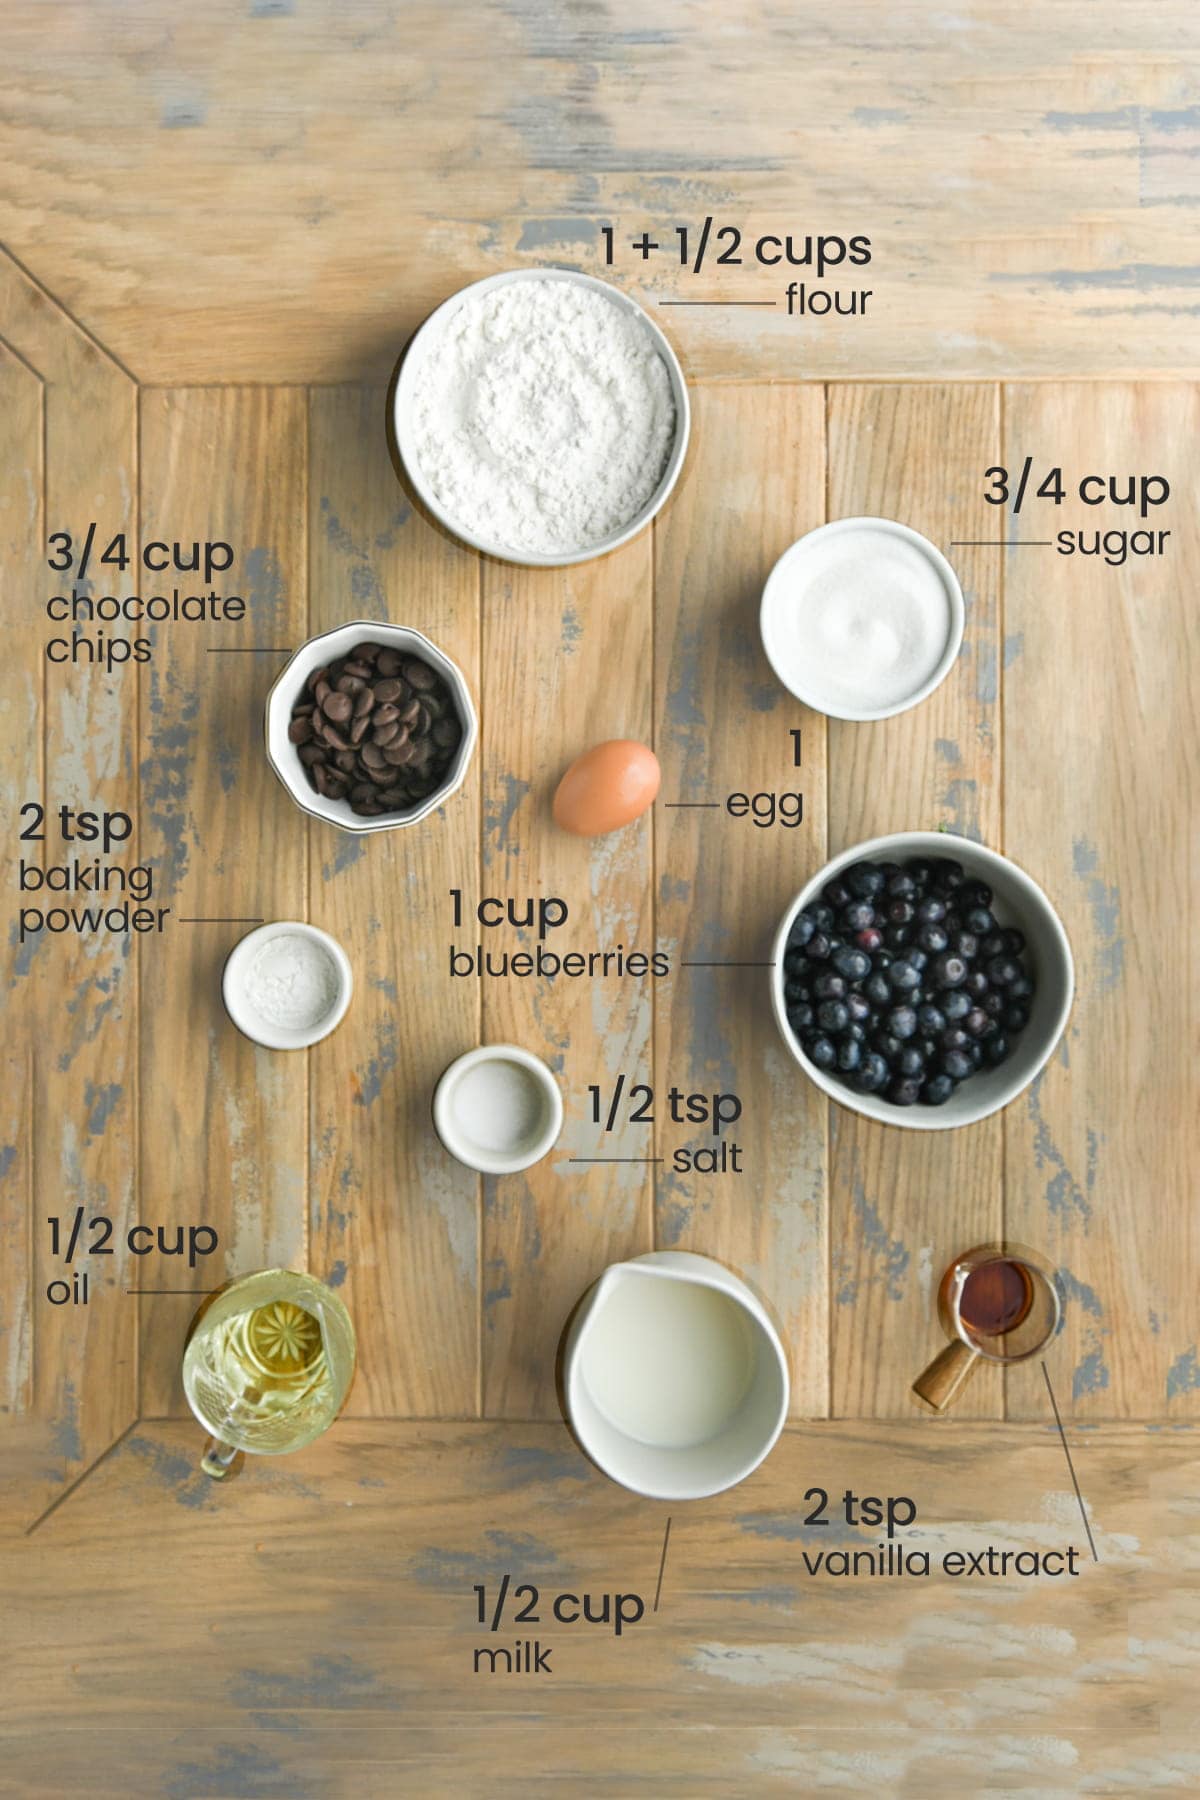 ingredients for blueberry chocolate chip muffins - flour, chocolate chips. sugar, egg, salt, baking powder, blueberries, oil, milk, and vanilla extract